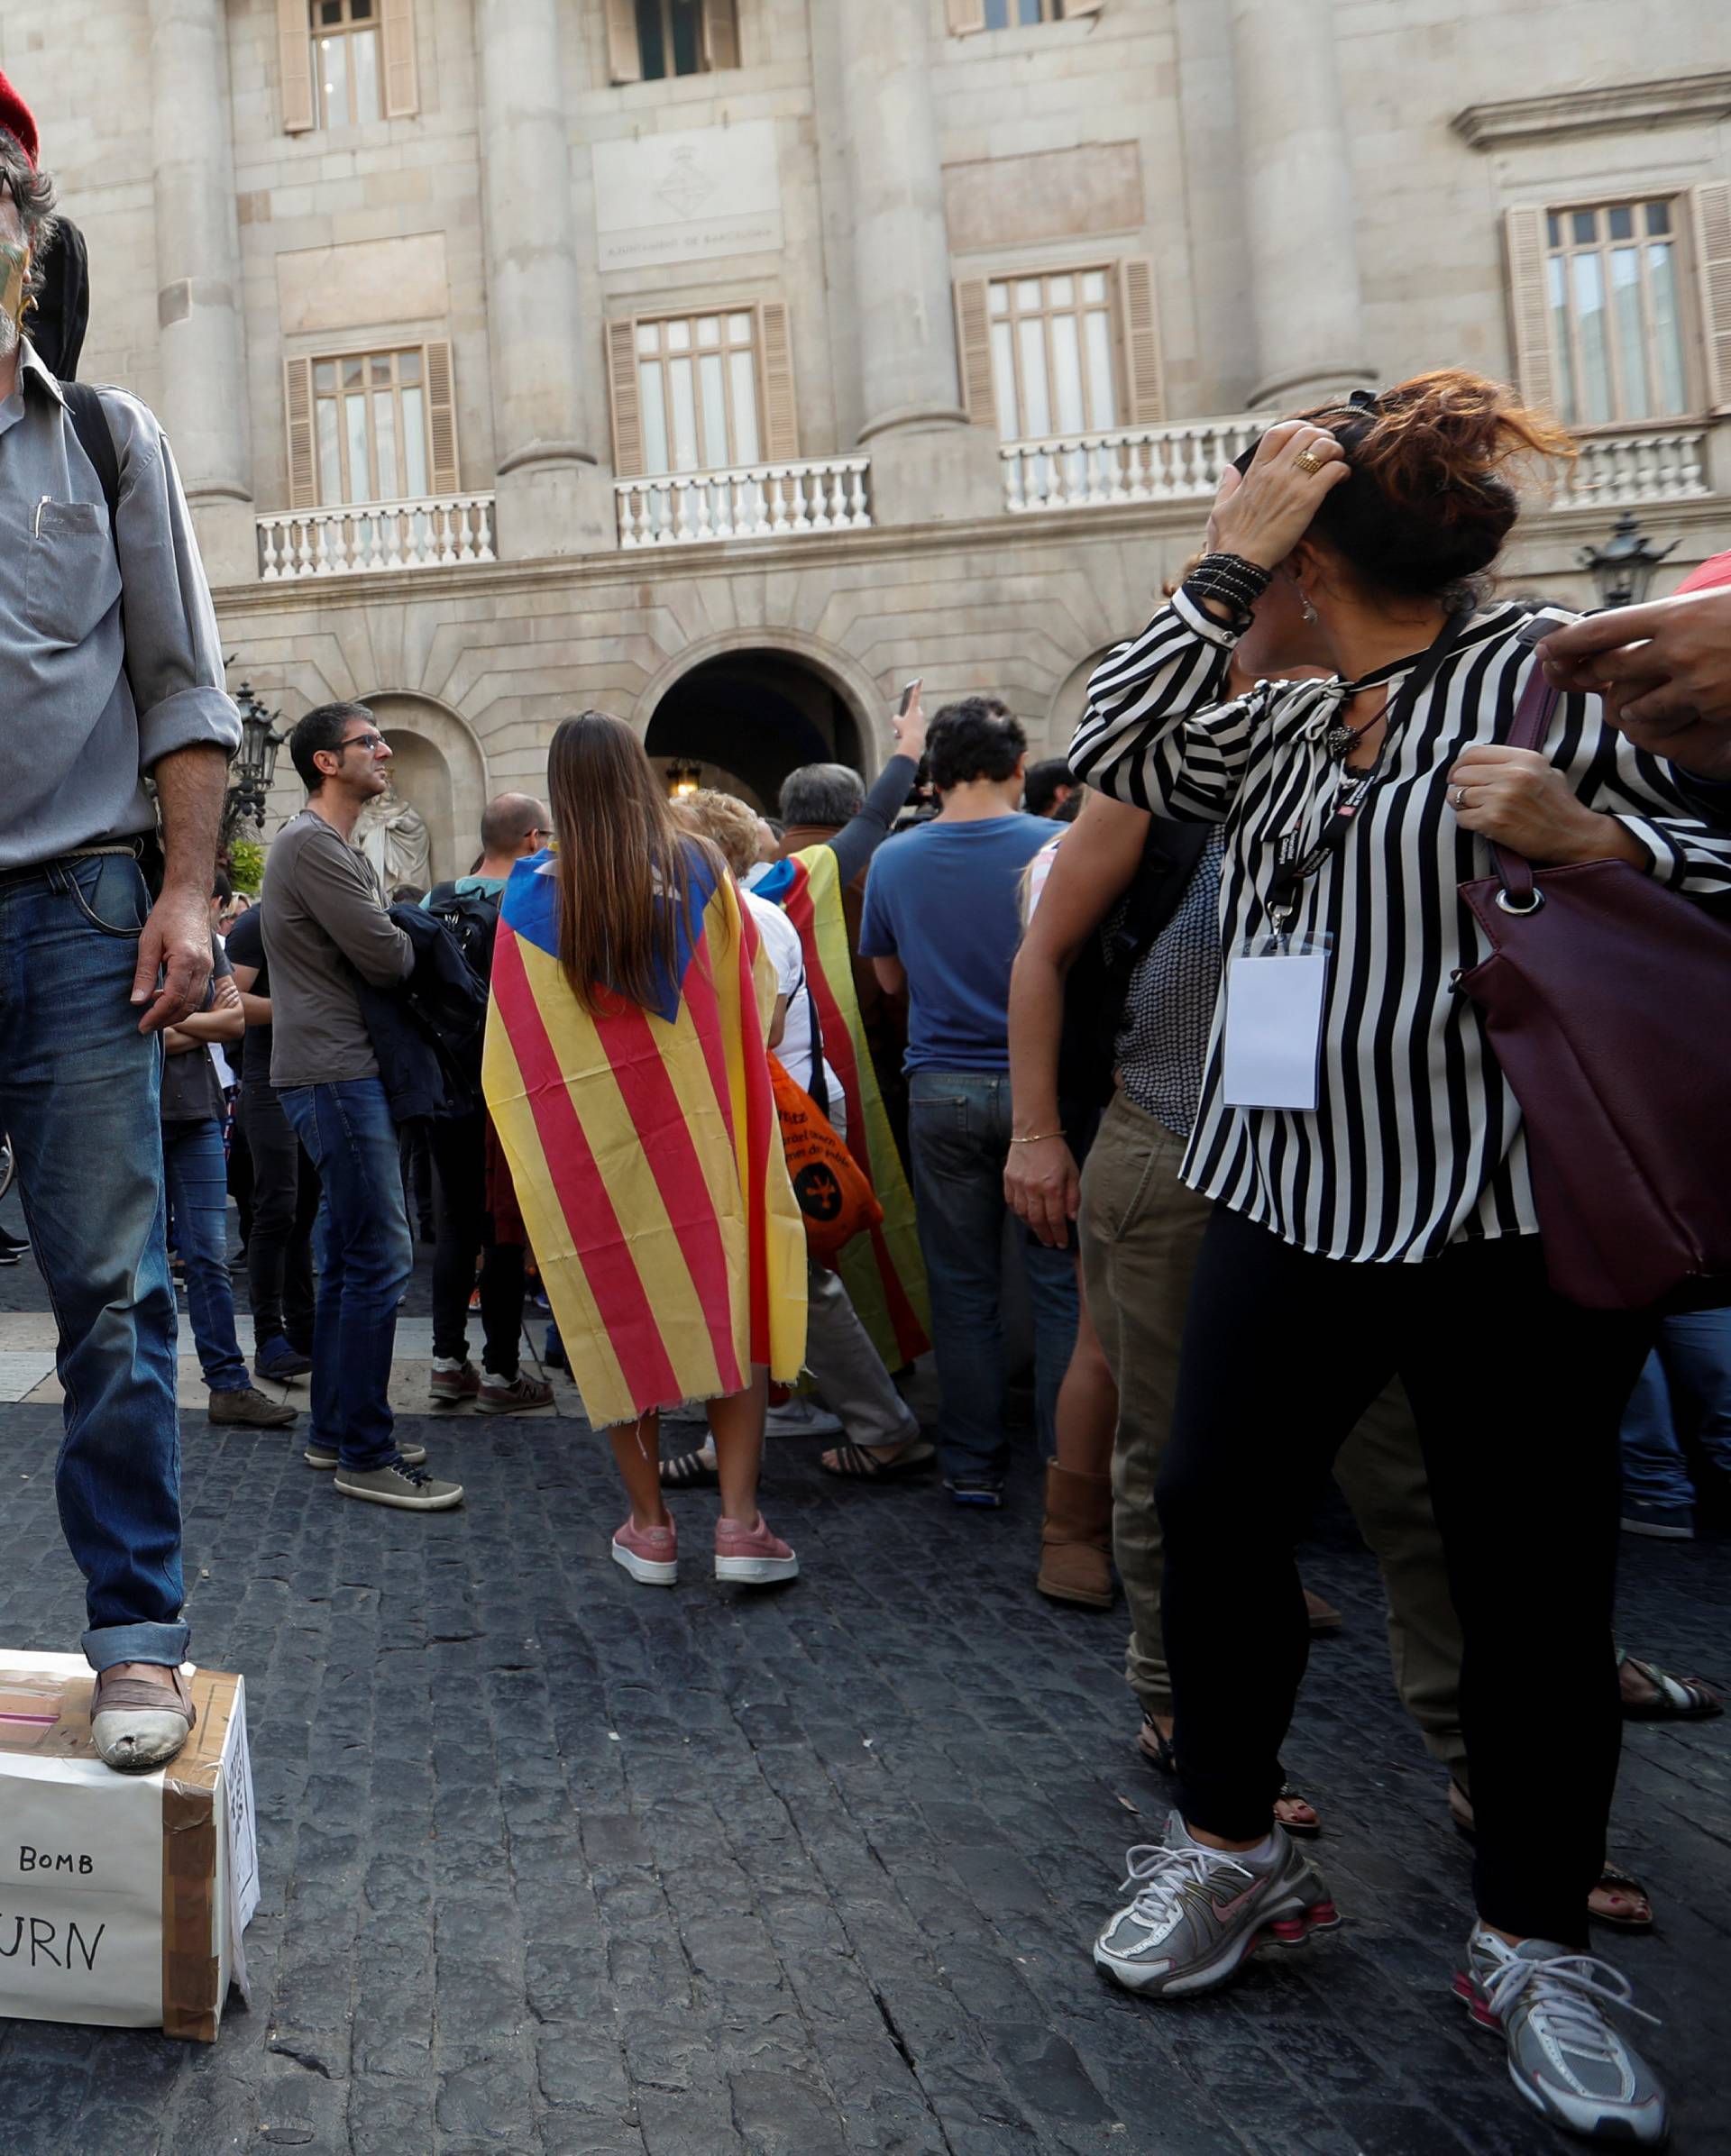 A man stages a performance in Plaza Sant Jaume after a protest called by pro-independence groups for citizens to gather at noon in front of city halls throughout Catalonia, in Barcelona